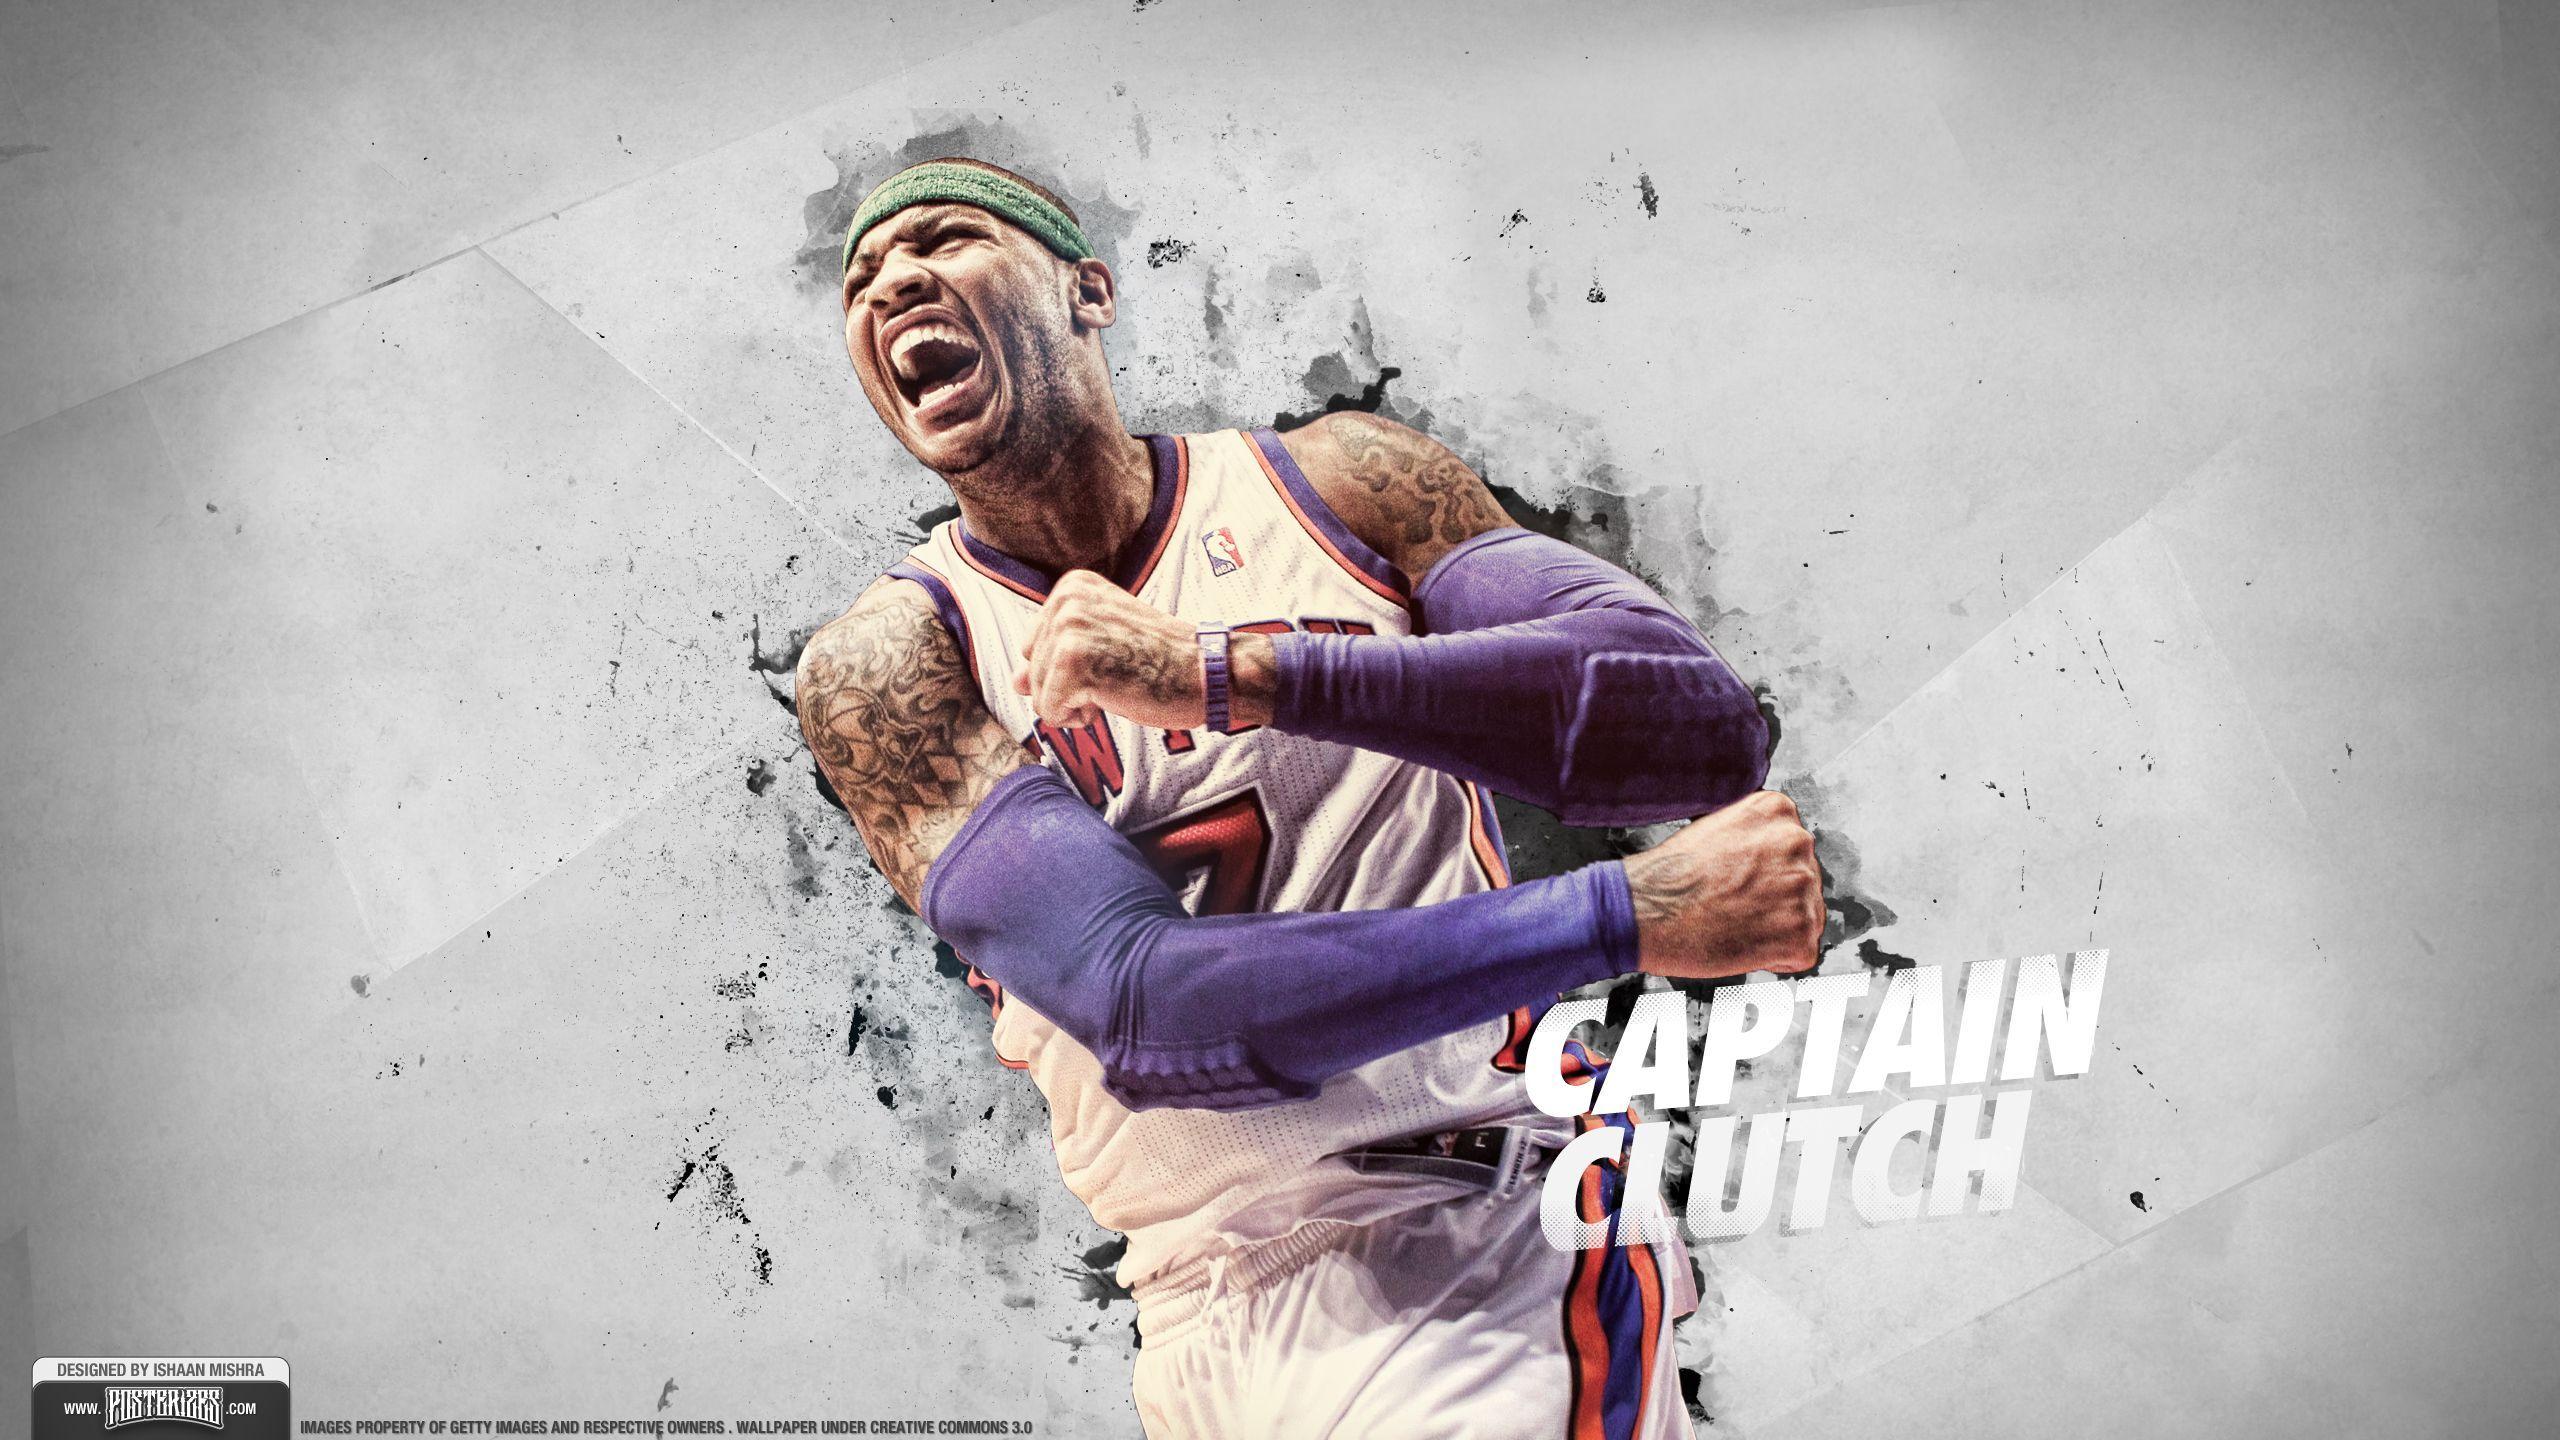 Wallpaper: Carmelo Anthony - &;Clutch&;